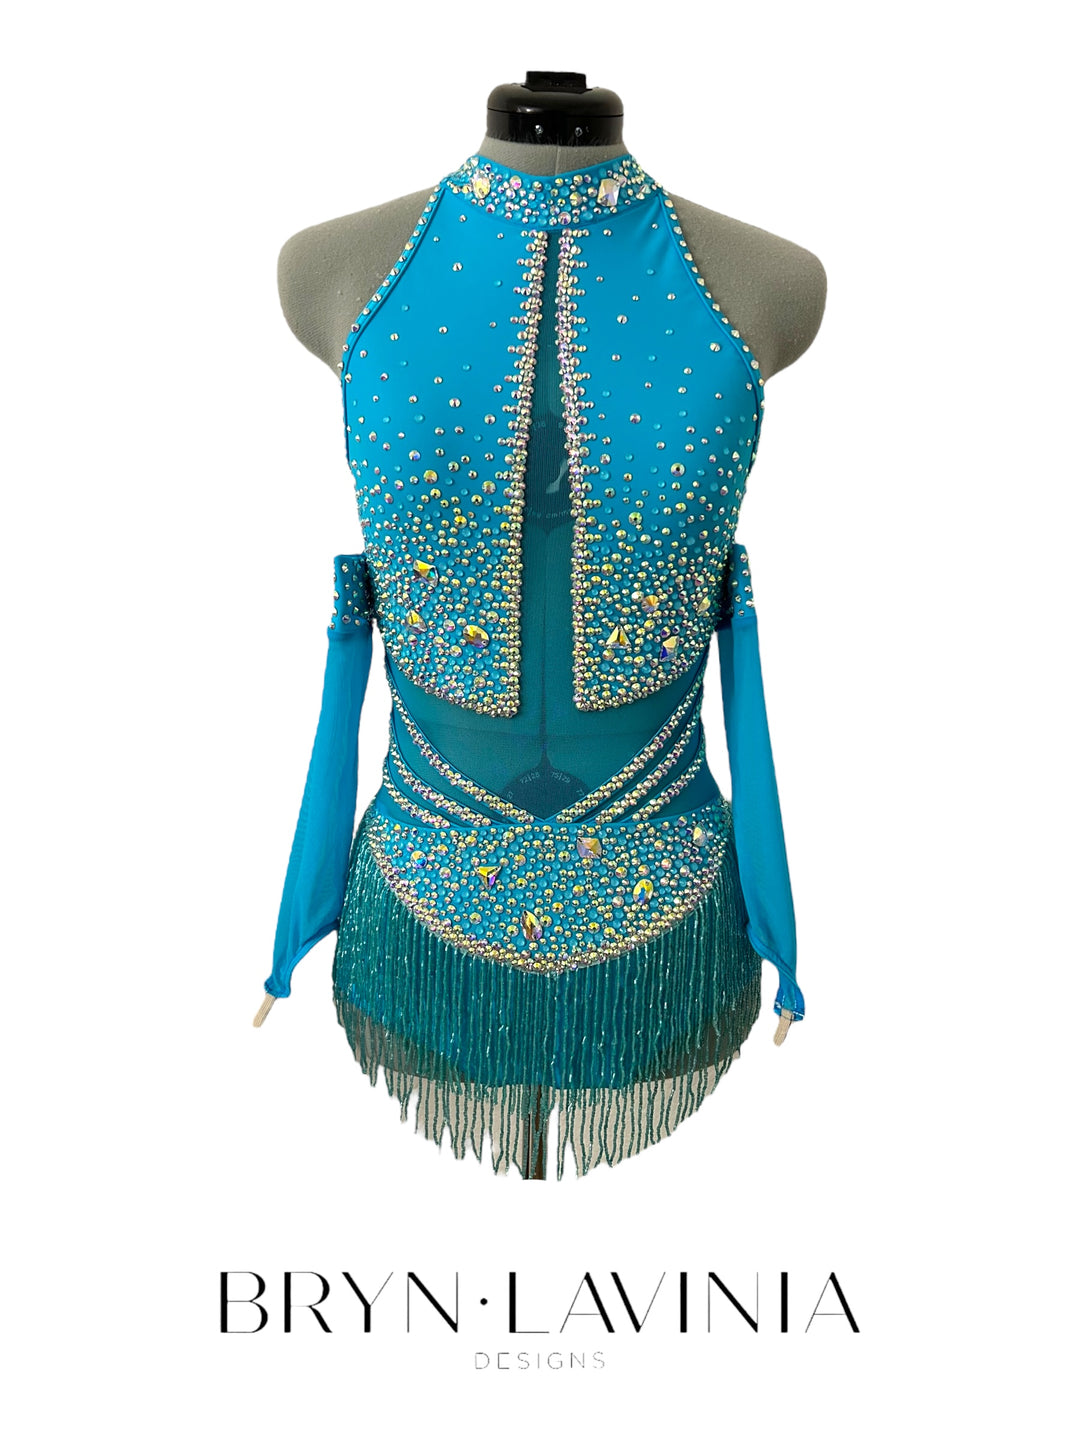 NEW AS Turquoise ready to ship costume